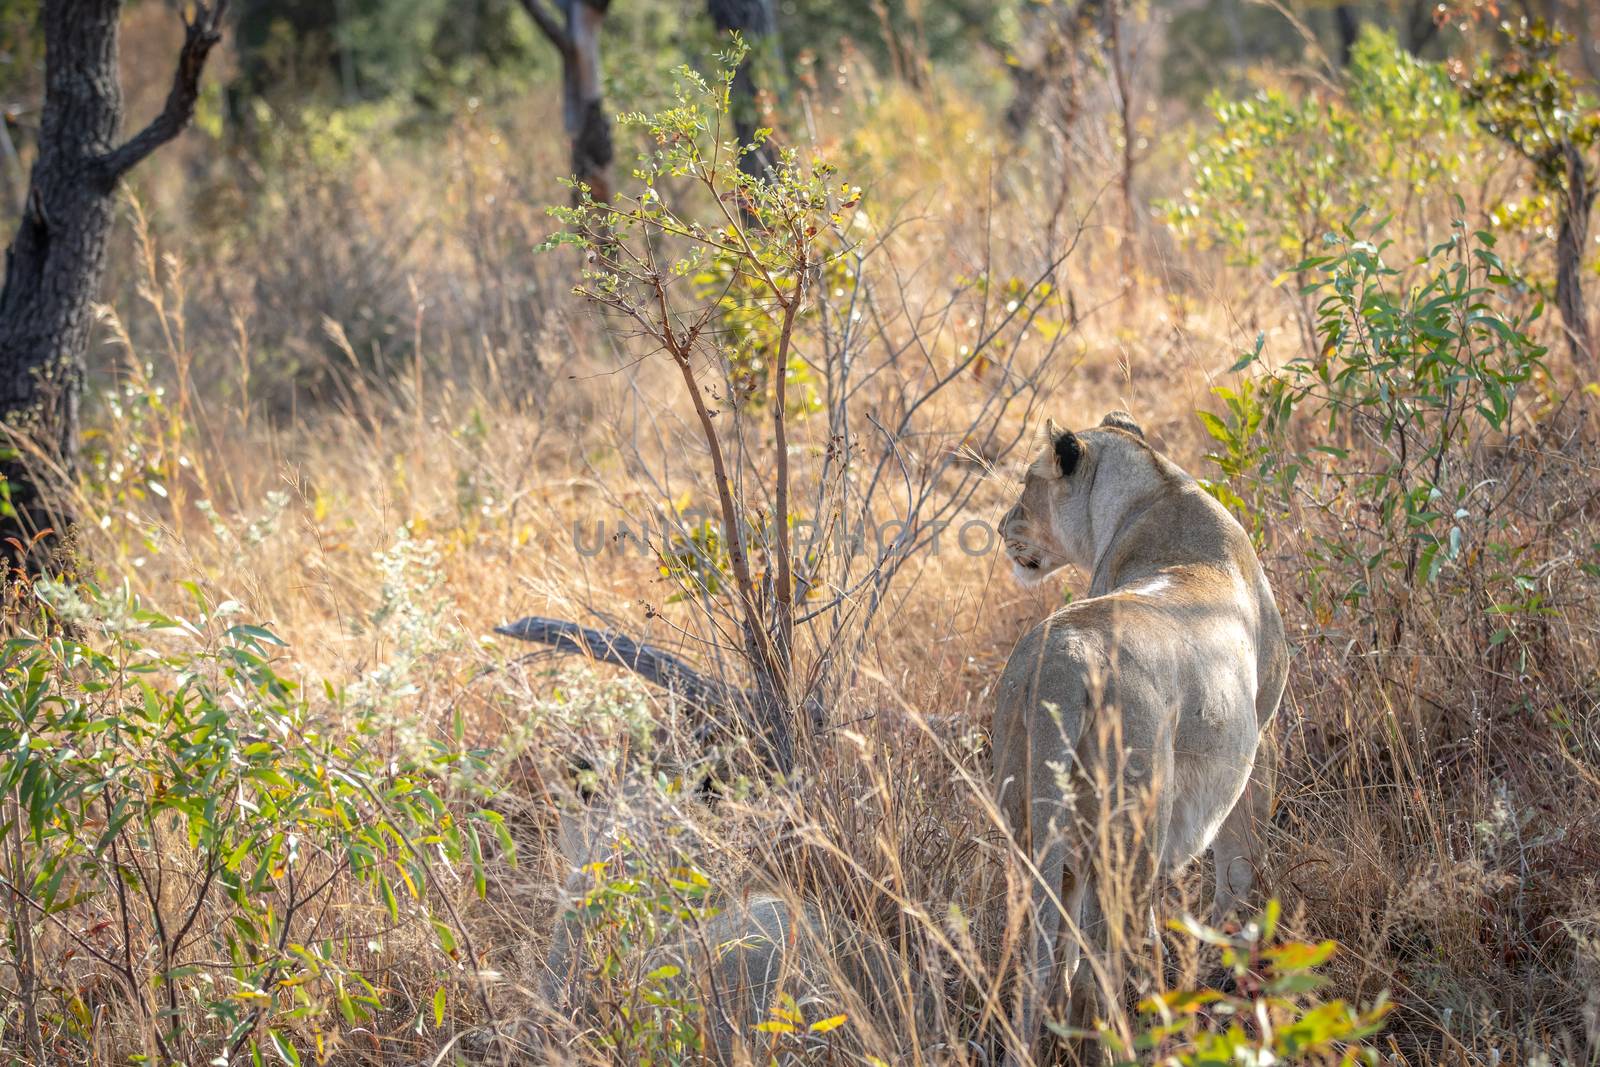 Lioness standing in the grass and looking. by Simoneemanphotography